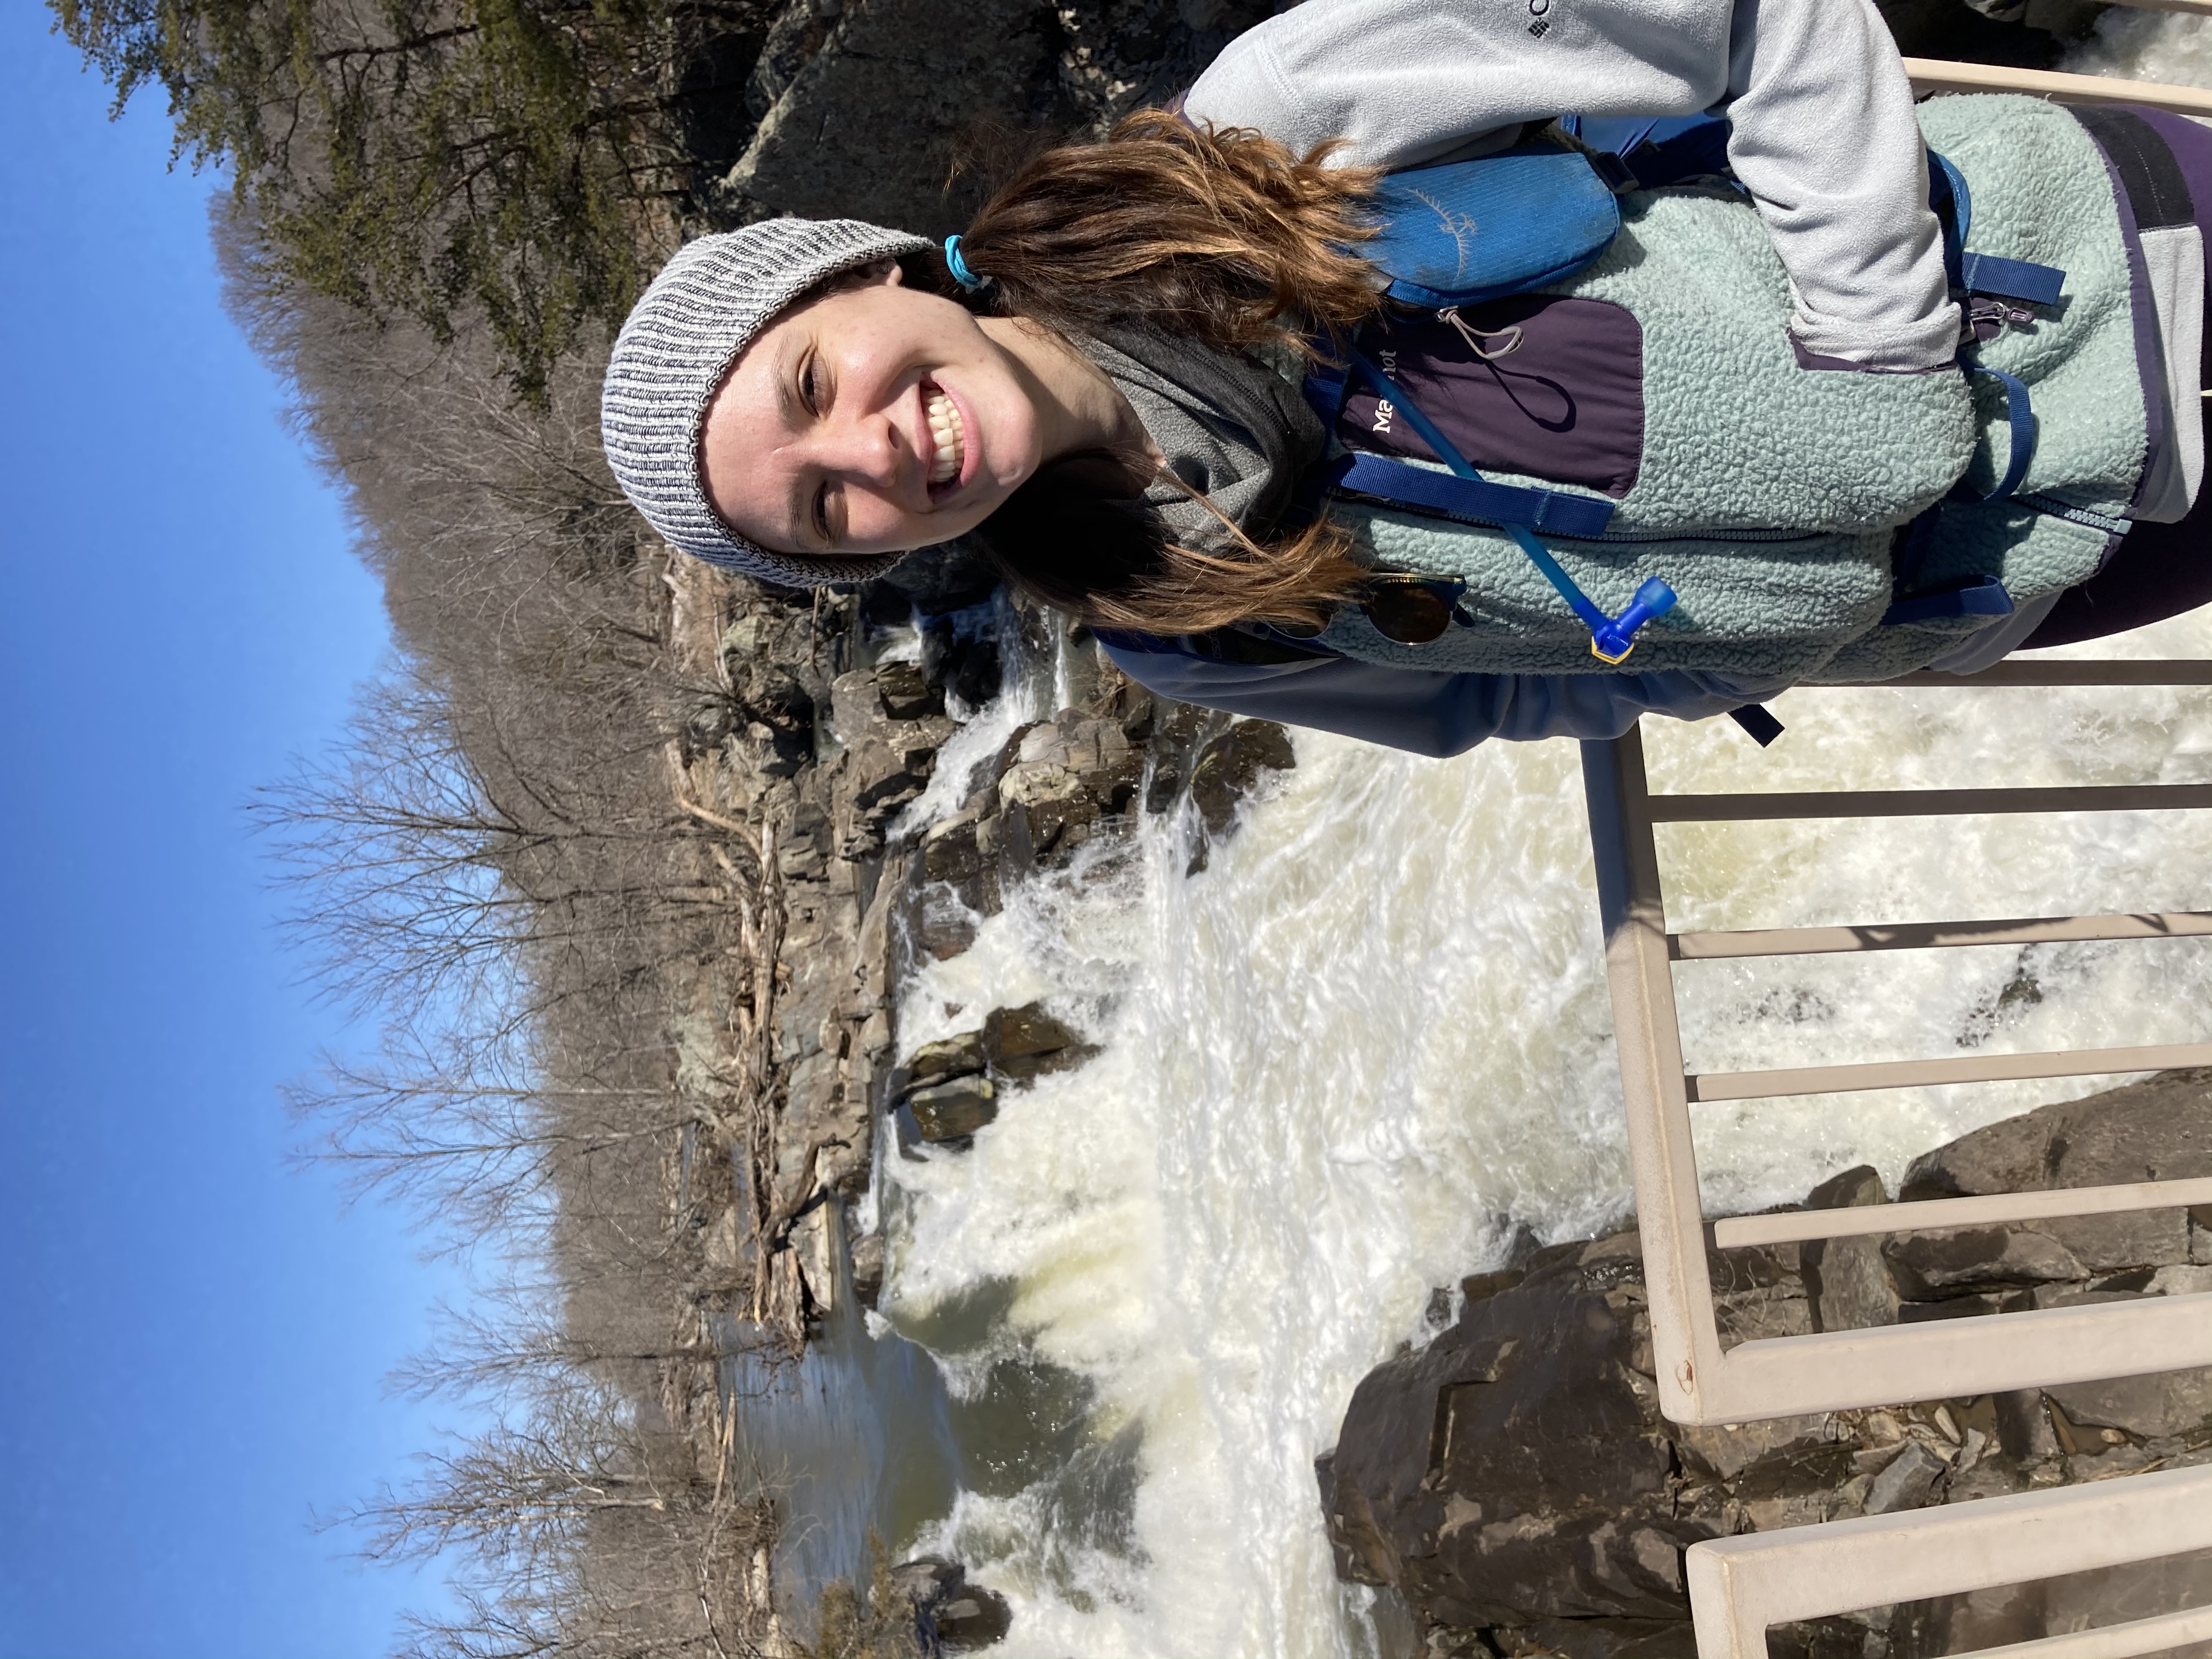 Rebecca Deegan smiling and wearing a knit hat while hiking along a swift moving creek on a chilly day.